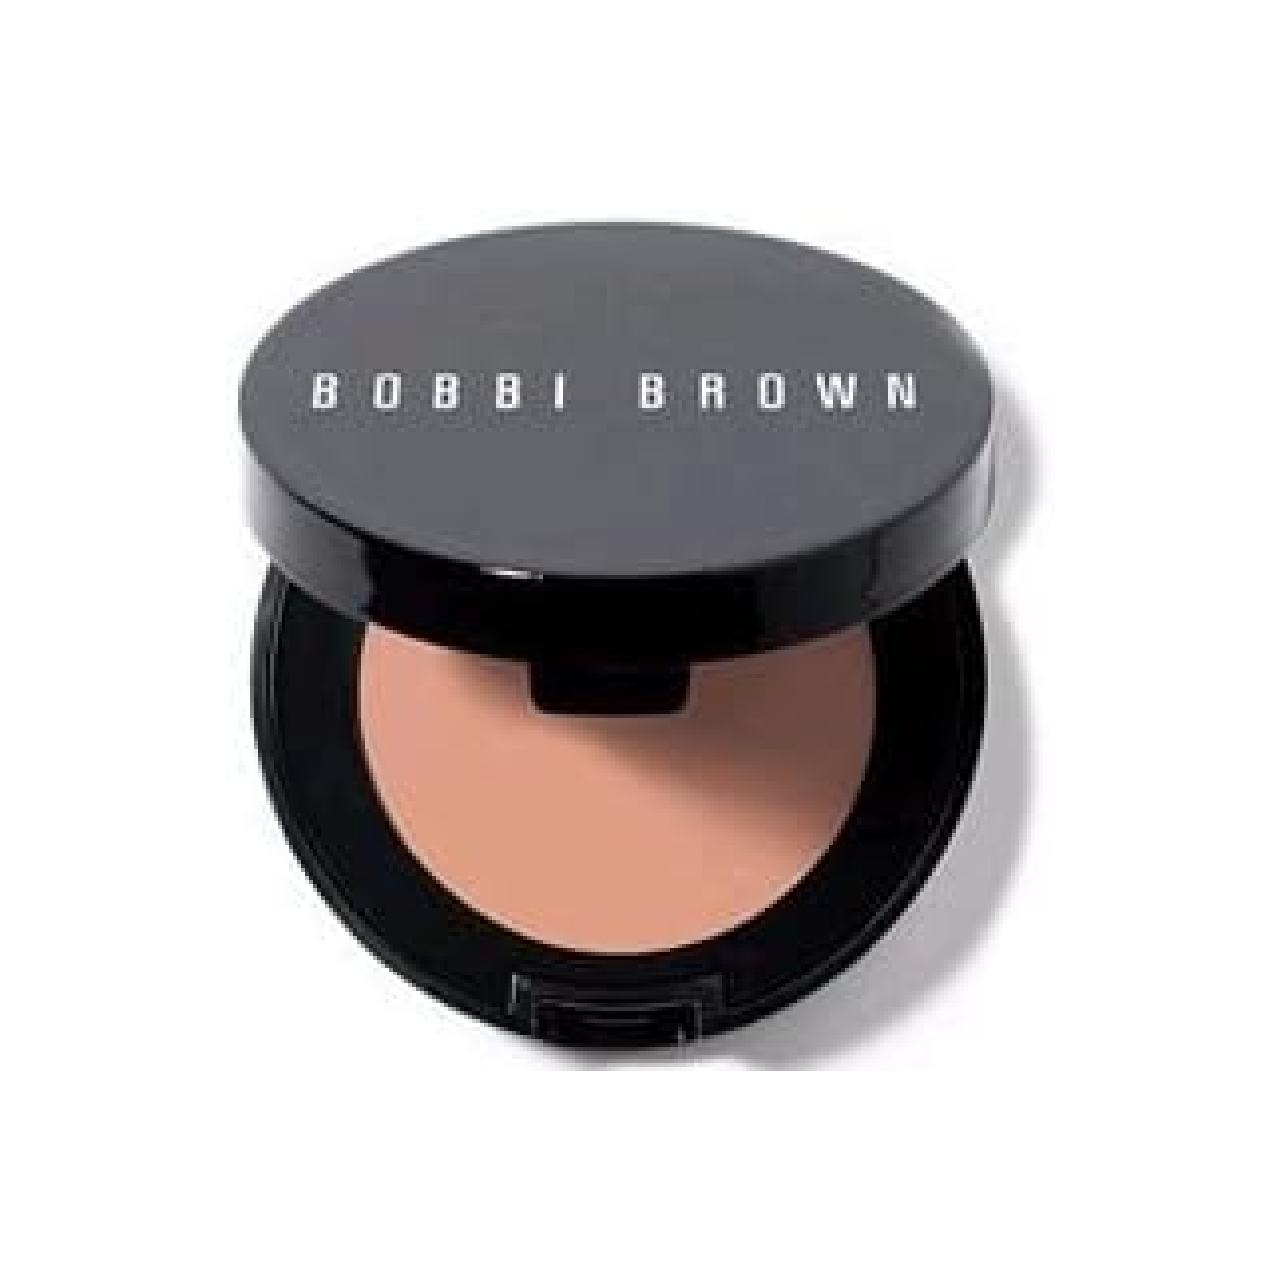 Open compact of Bobbi Brown's Under Eye Corrector displayed on a clean white surface